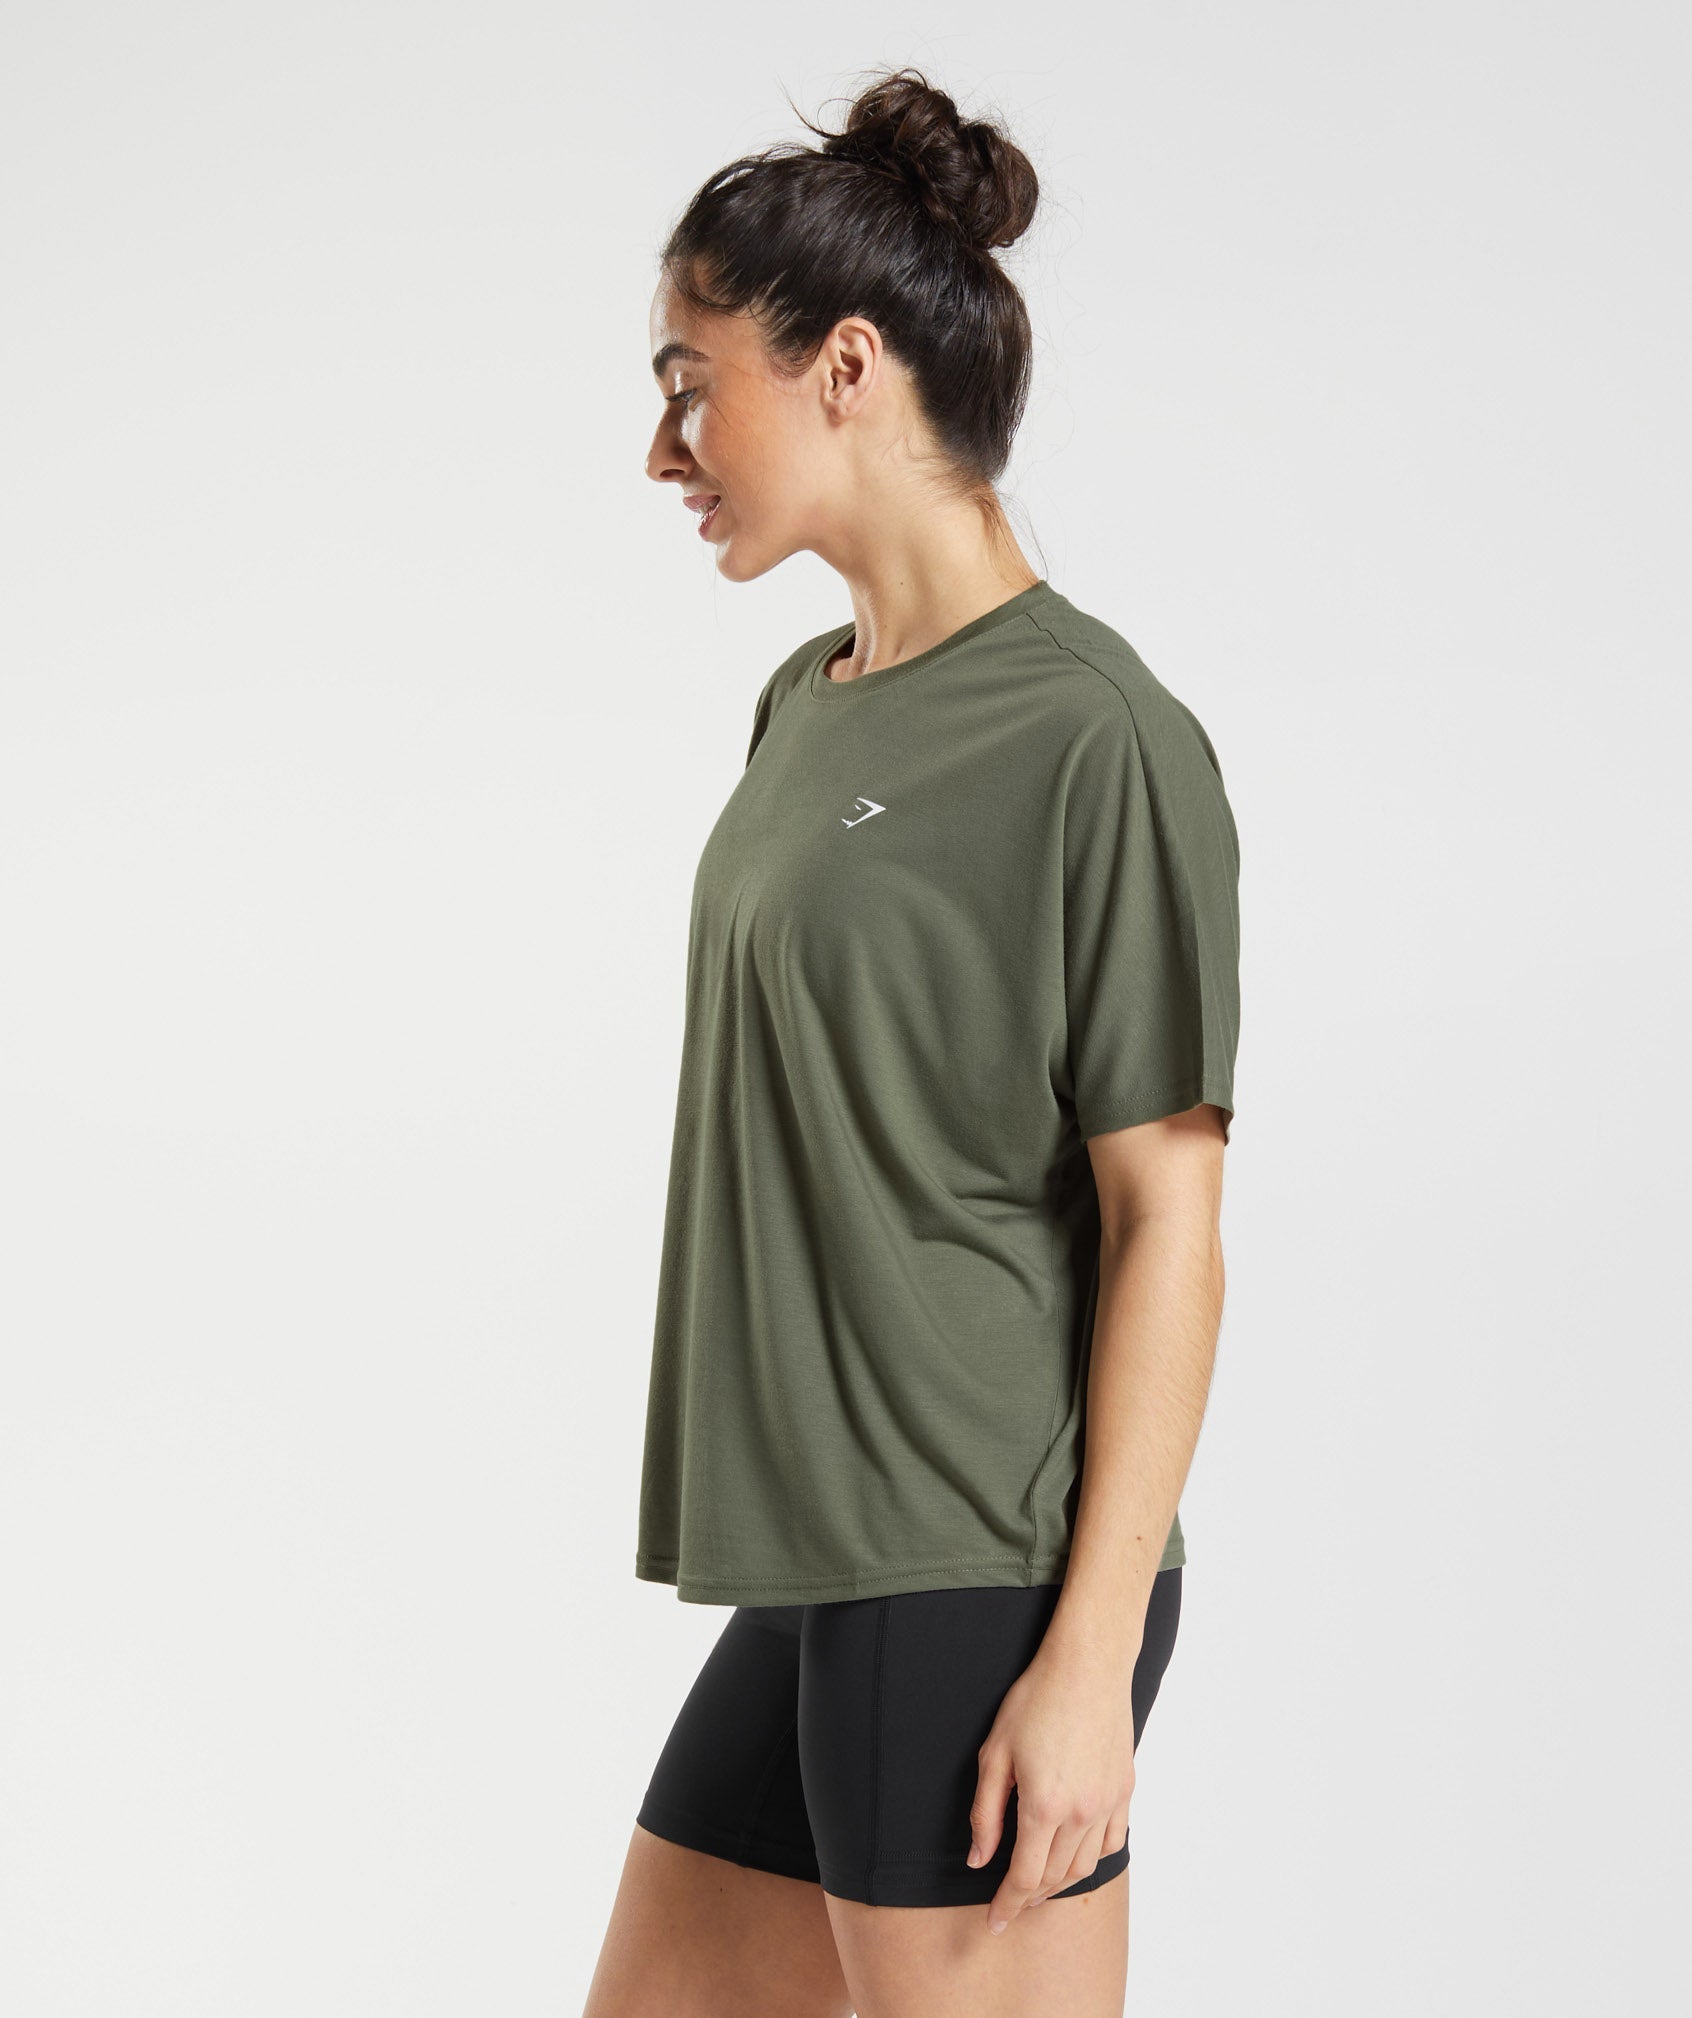 Super Soft T-Shirt in Dusty Olive - view 3